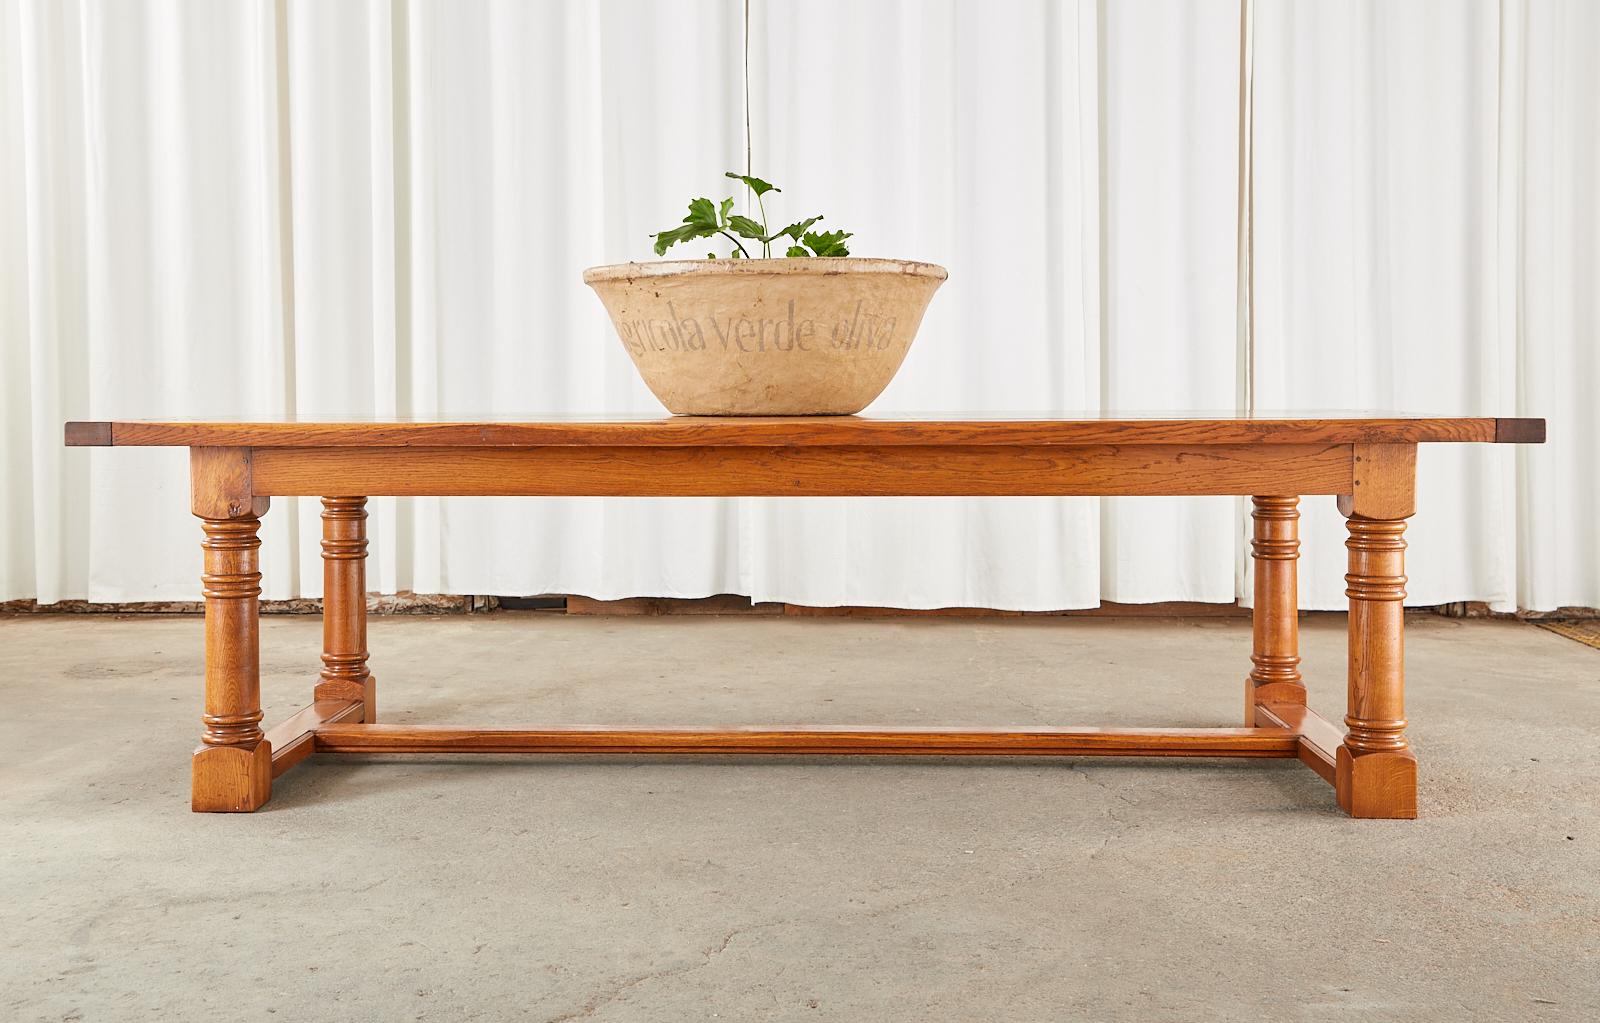 Grand scale country Italian farmhouse refectory table or dining table crafted from radiant oak. The massive rectangular top is constructed from seven oak planks measuring 2 inches thick having breadboard ends. The table is made with wood peg